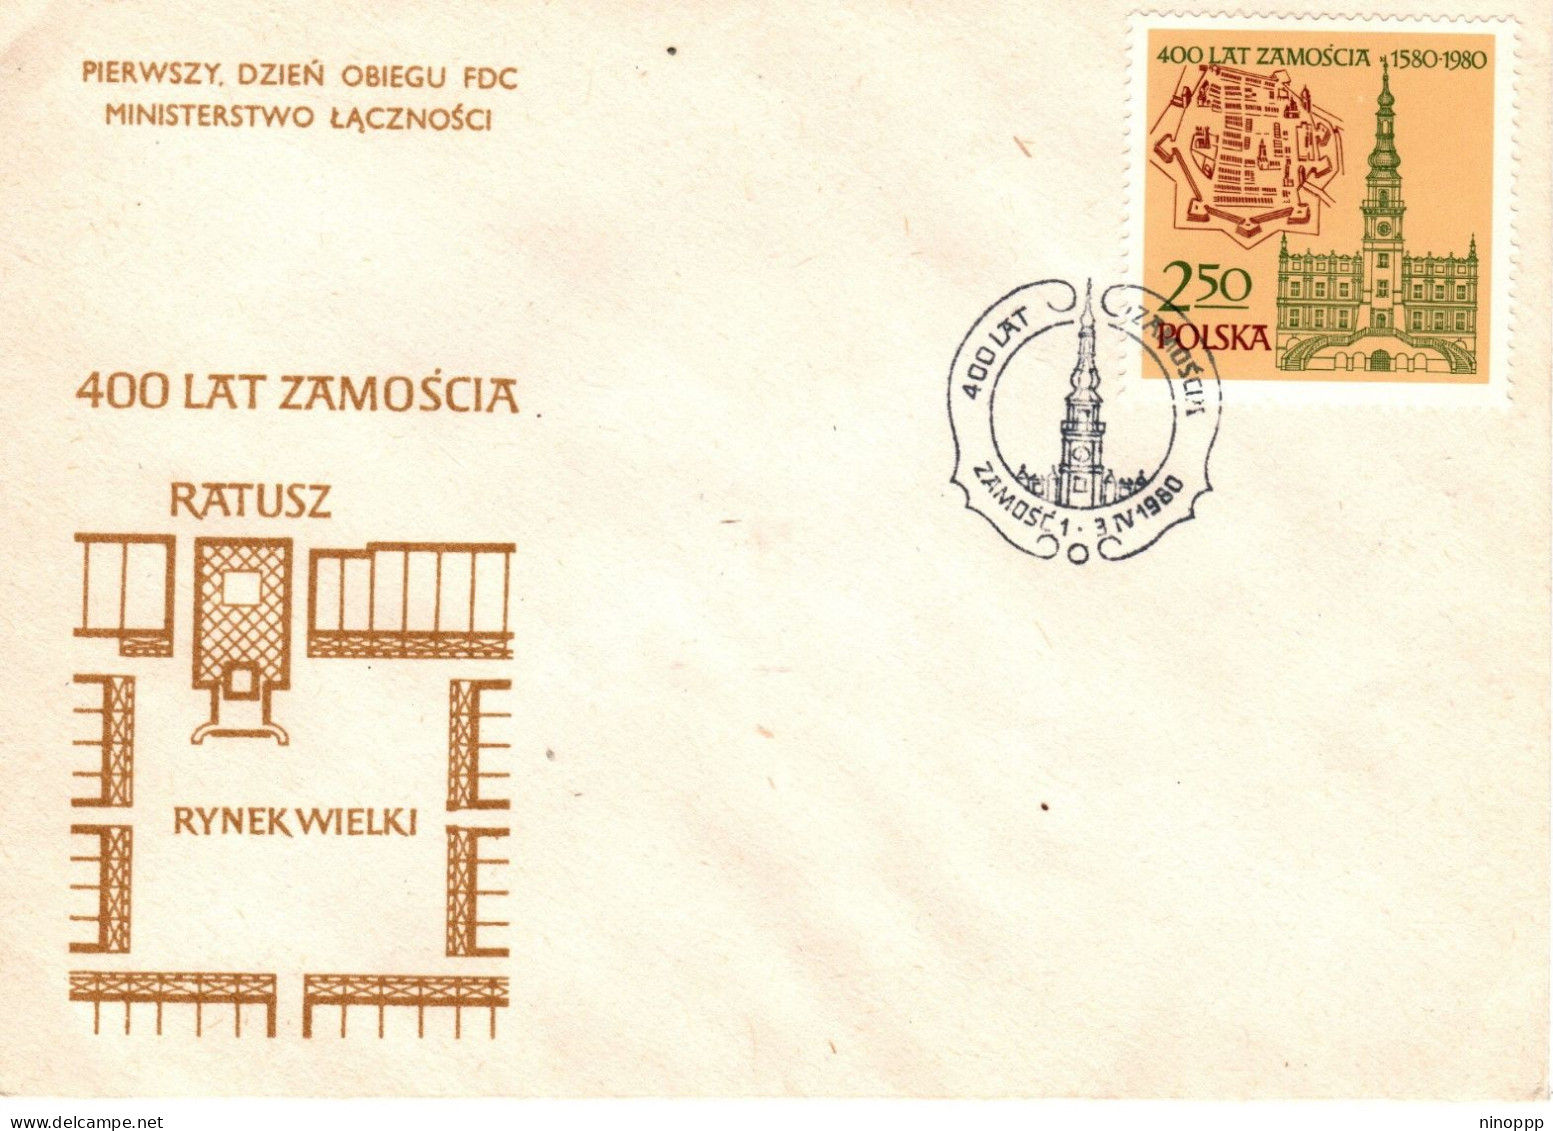 Poland 1980 Zamosc 400th Anniversary,First Day Cover - FDC